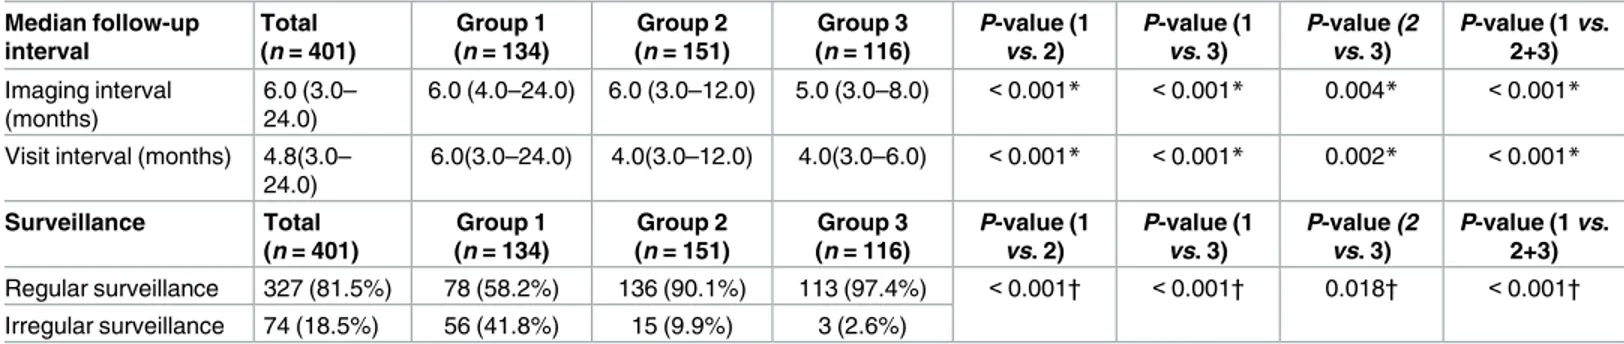 Table 2. Follow-up interval of patients. Median follow-up interval Total (n = 401) Group 1 (n = 134) Group 2 (n = 151) Group 3 (n = 116) P-value (1vs